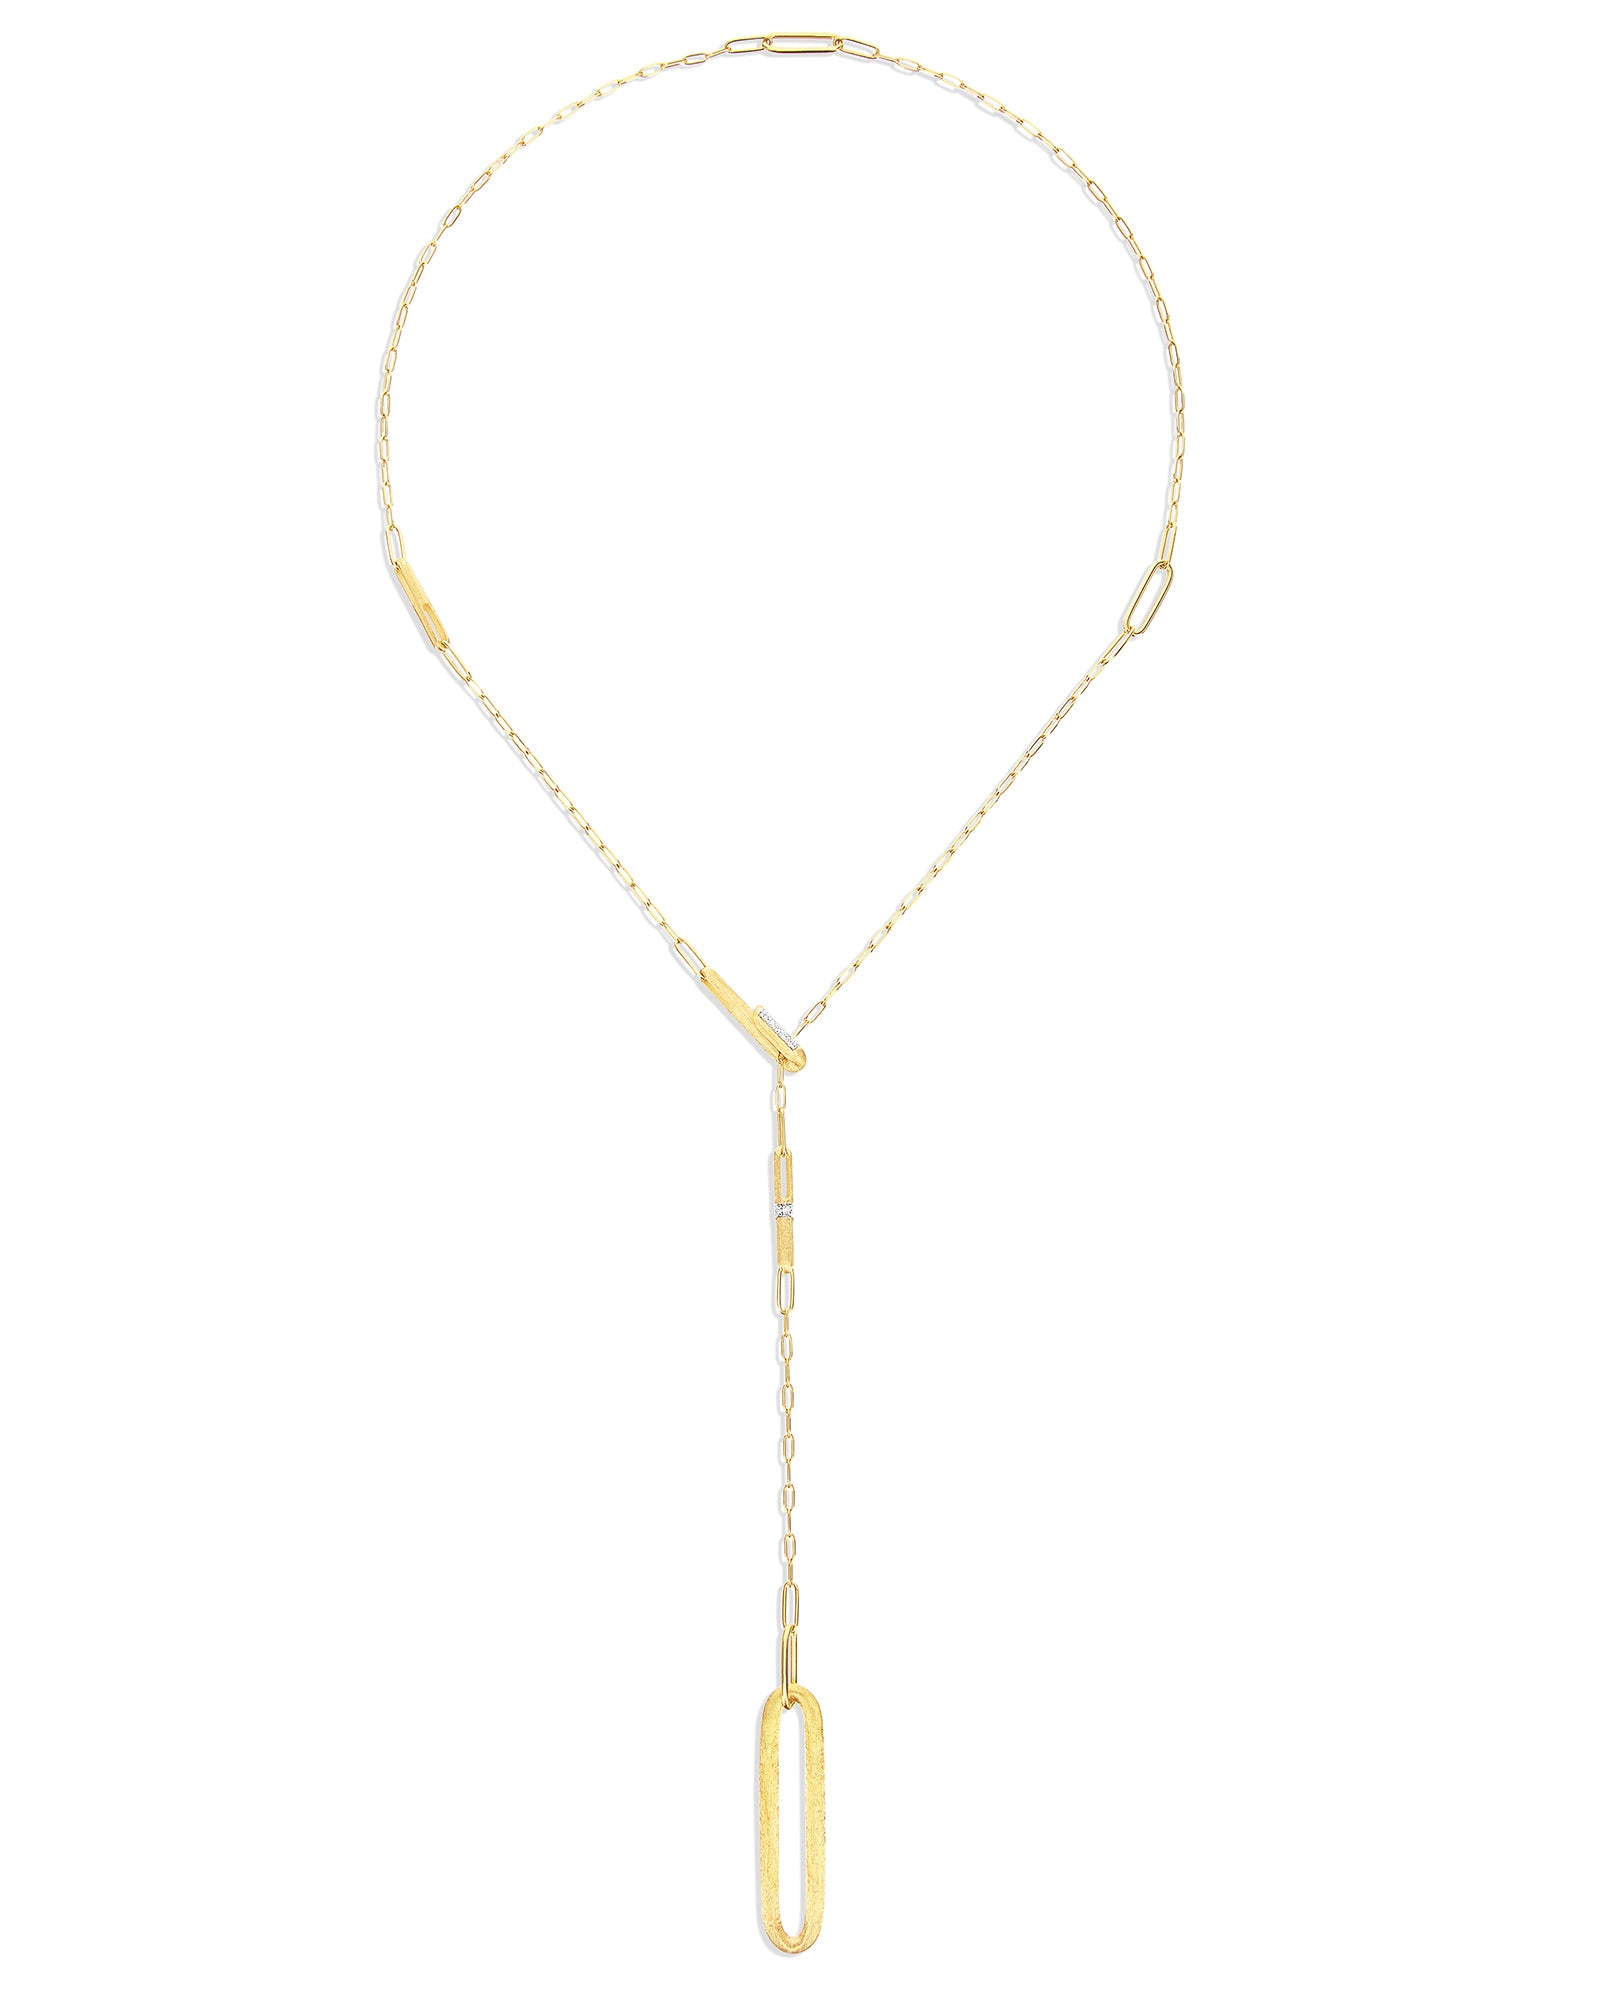 LIBERA Soffio Gold and Diamonds Y necklace